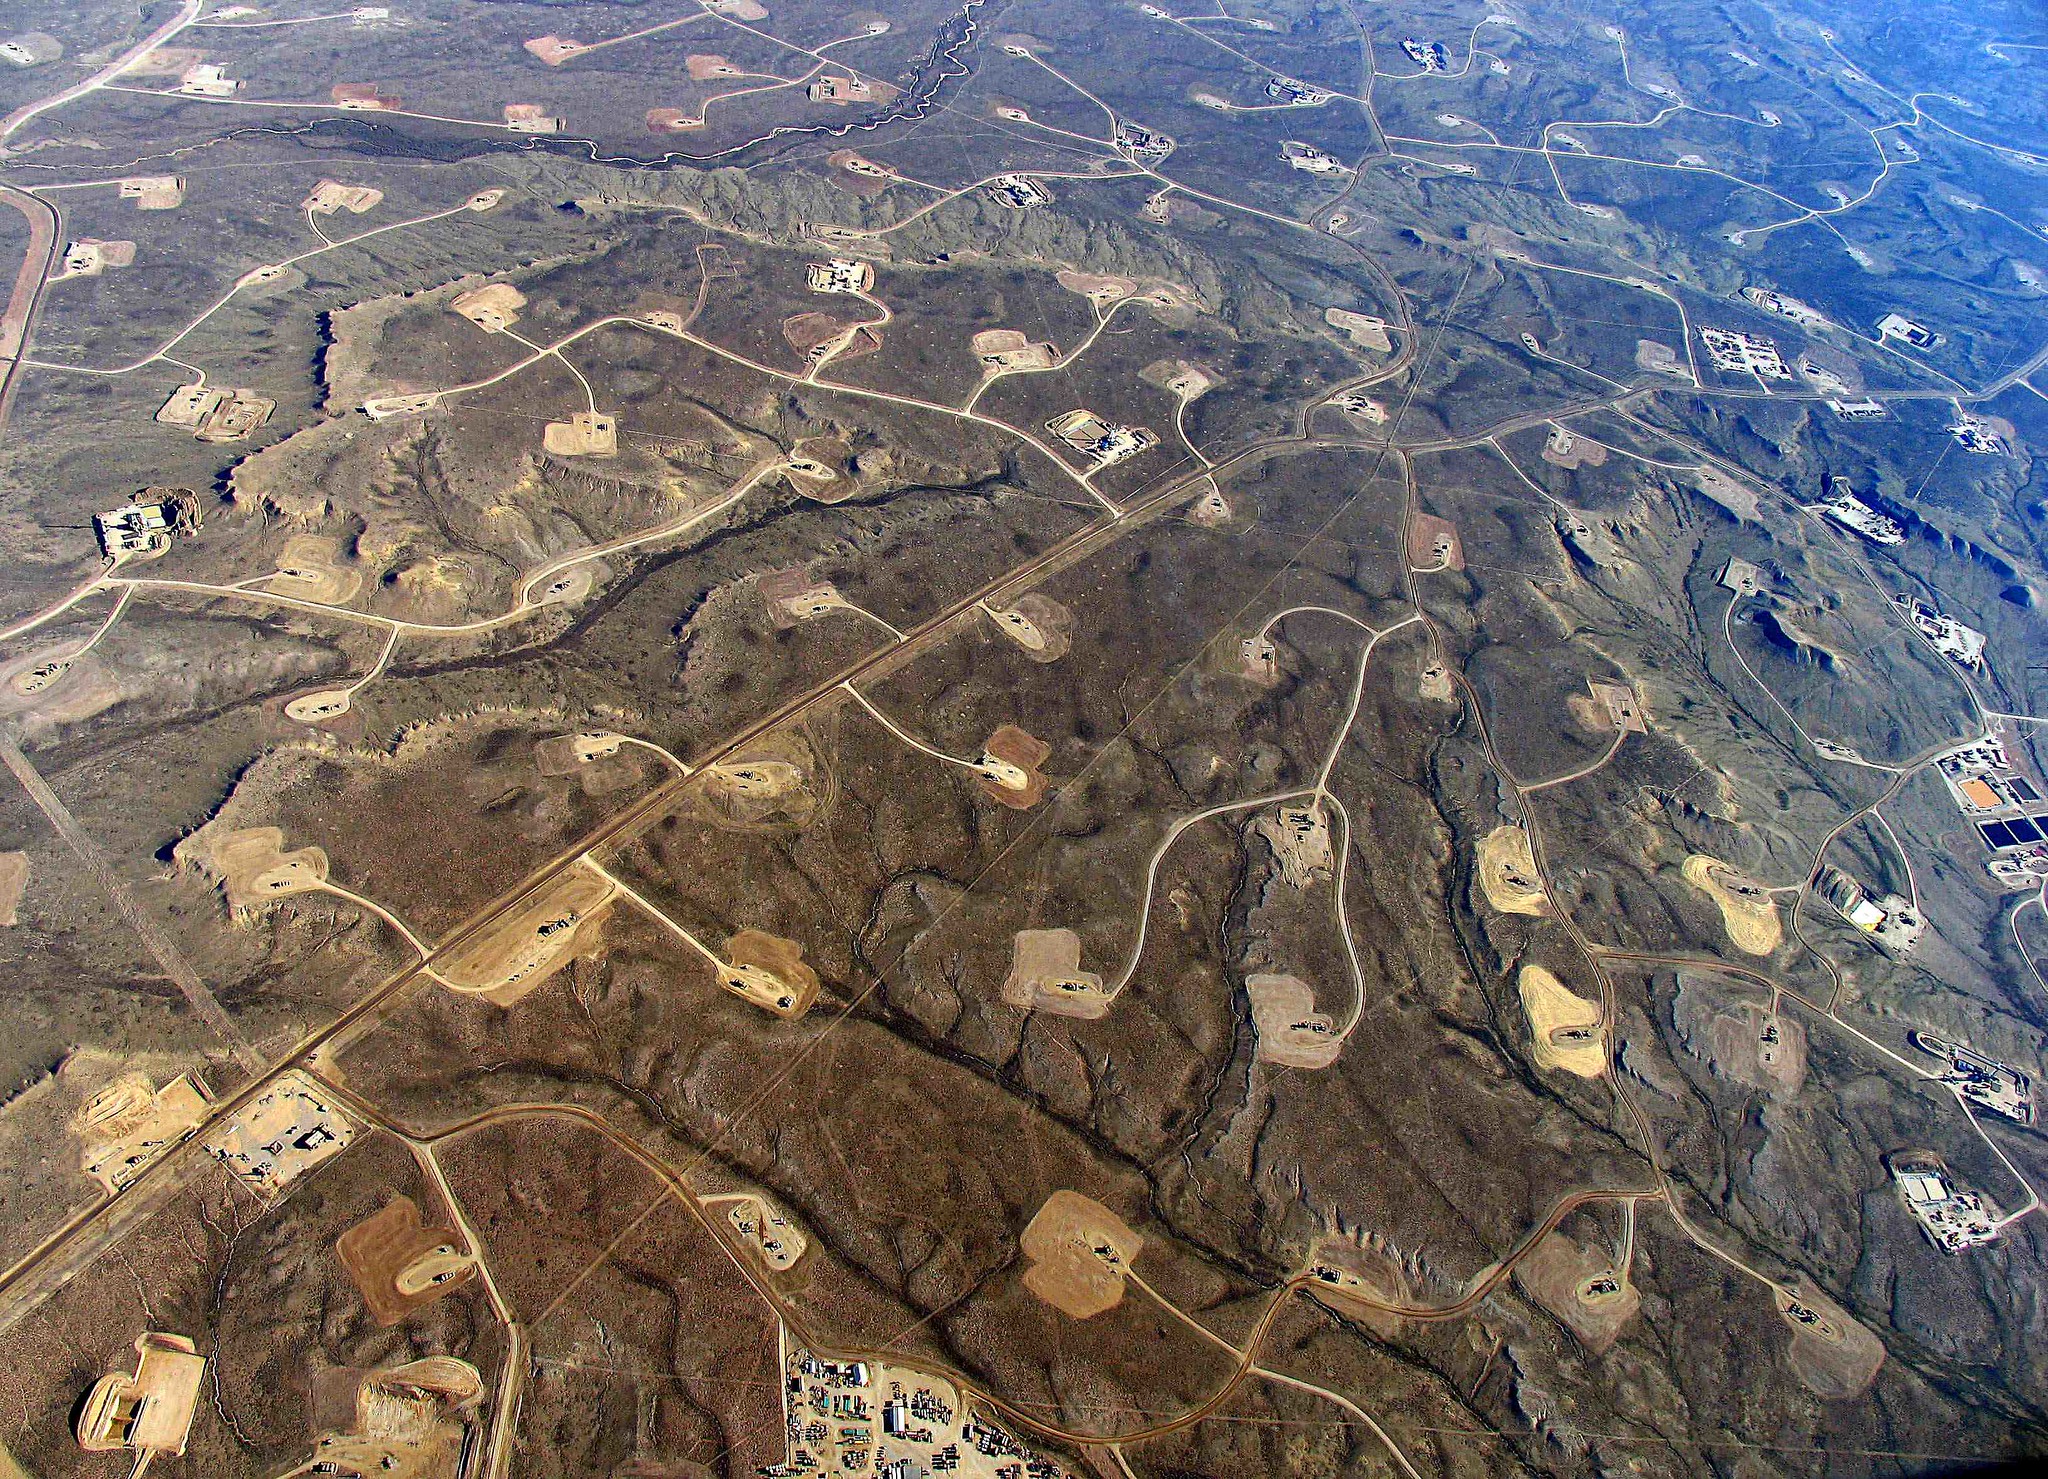 A dense web of roads connects a series of fracking sites.